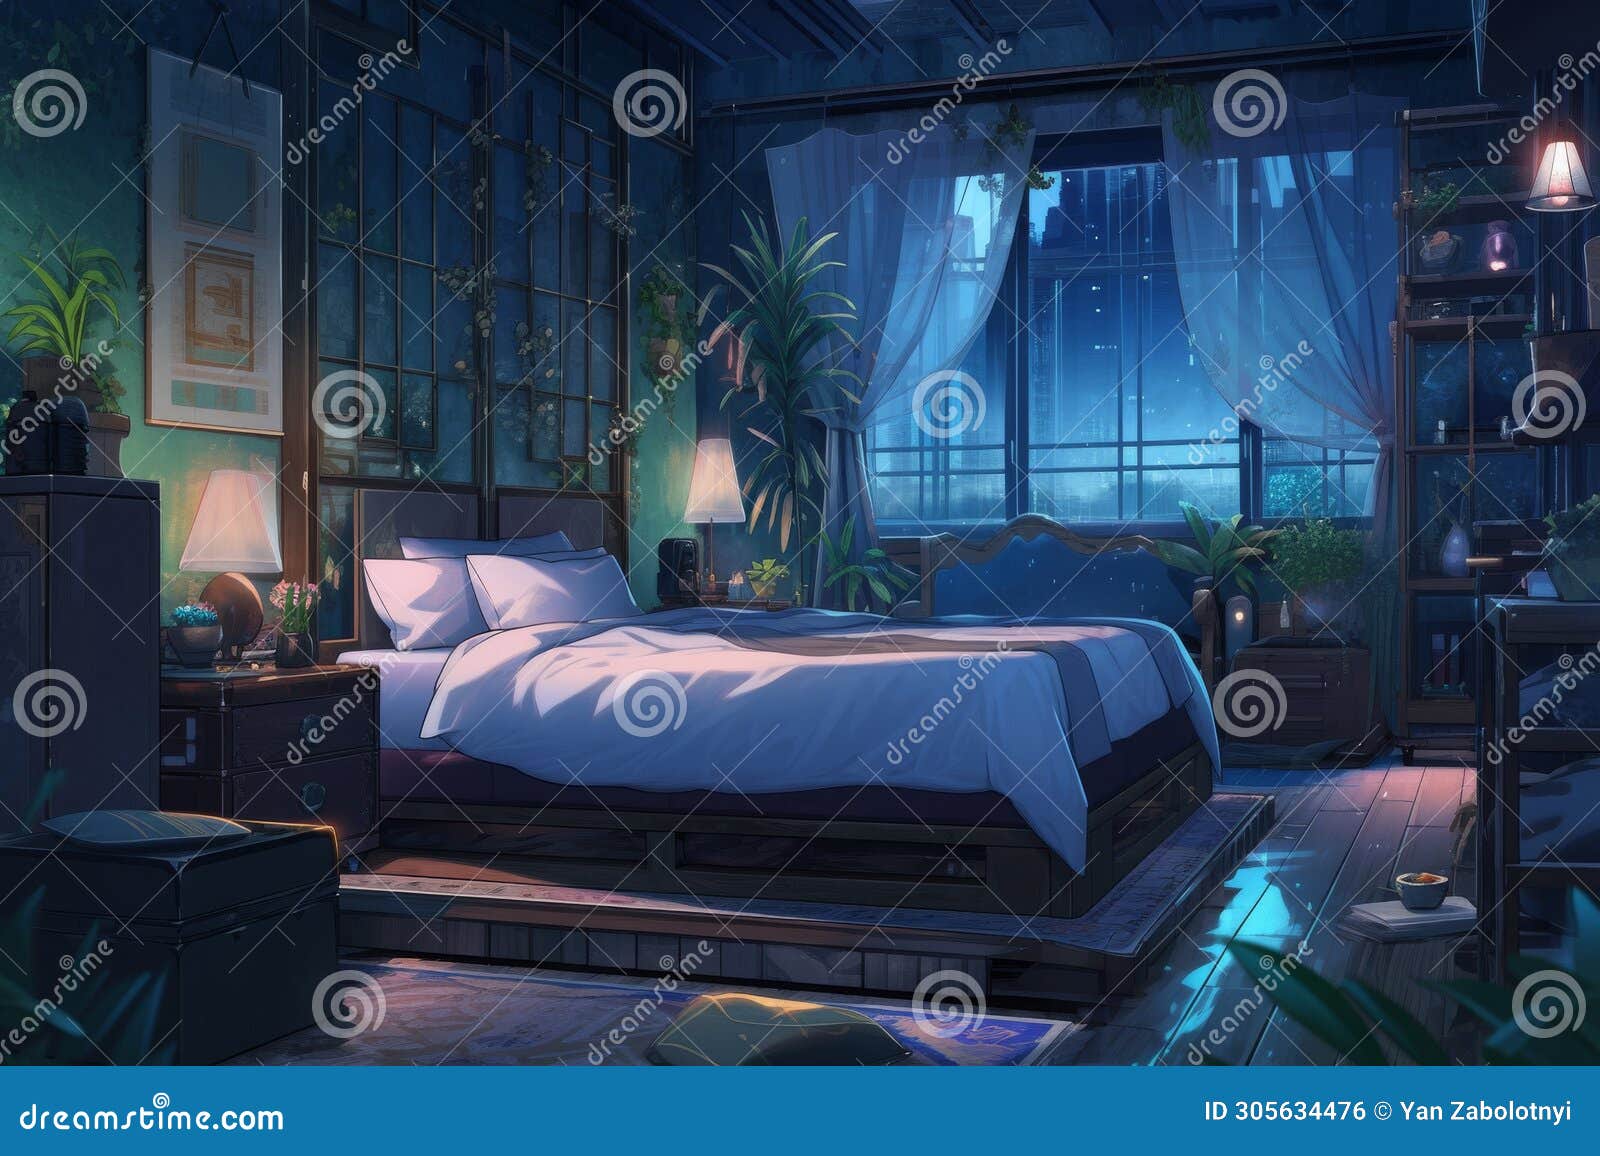 https://thumbs.dreamstime.com/z/high-resolution-digital-artwork-nighttime-urban-sanctuary-cozy-vibe-%D1%81oncept-abstract-paintings-botanical-illustrations-305634476.jpg